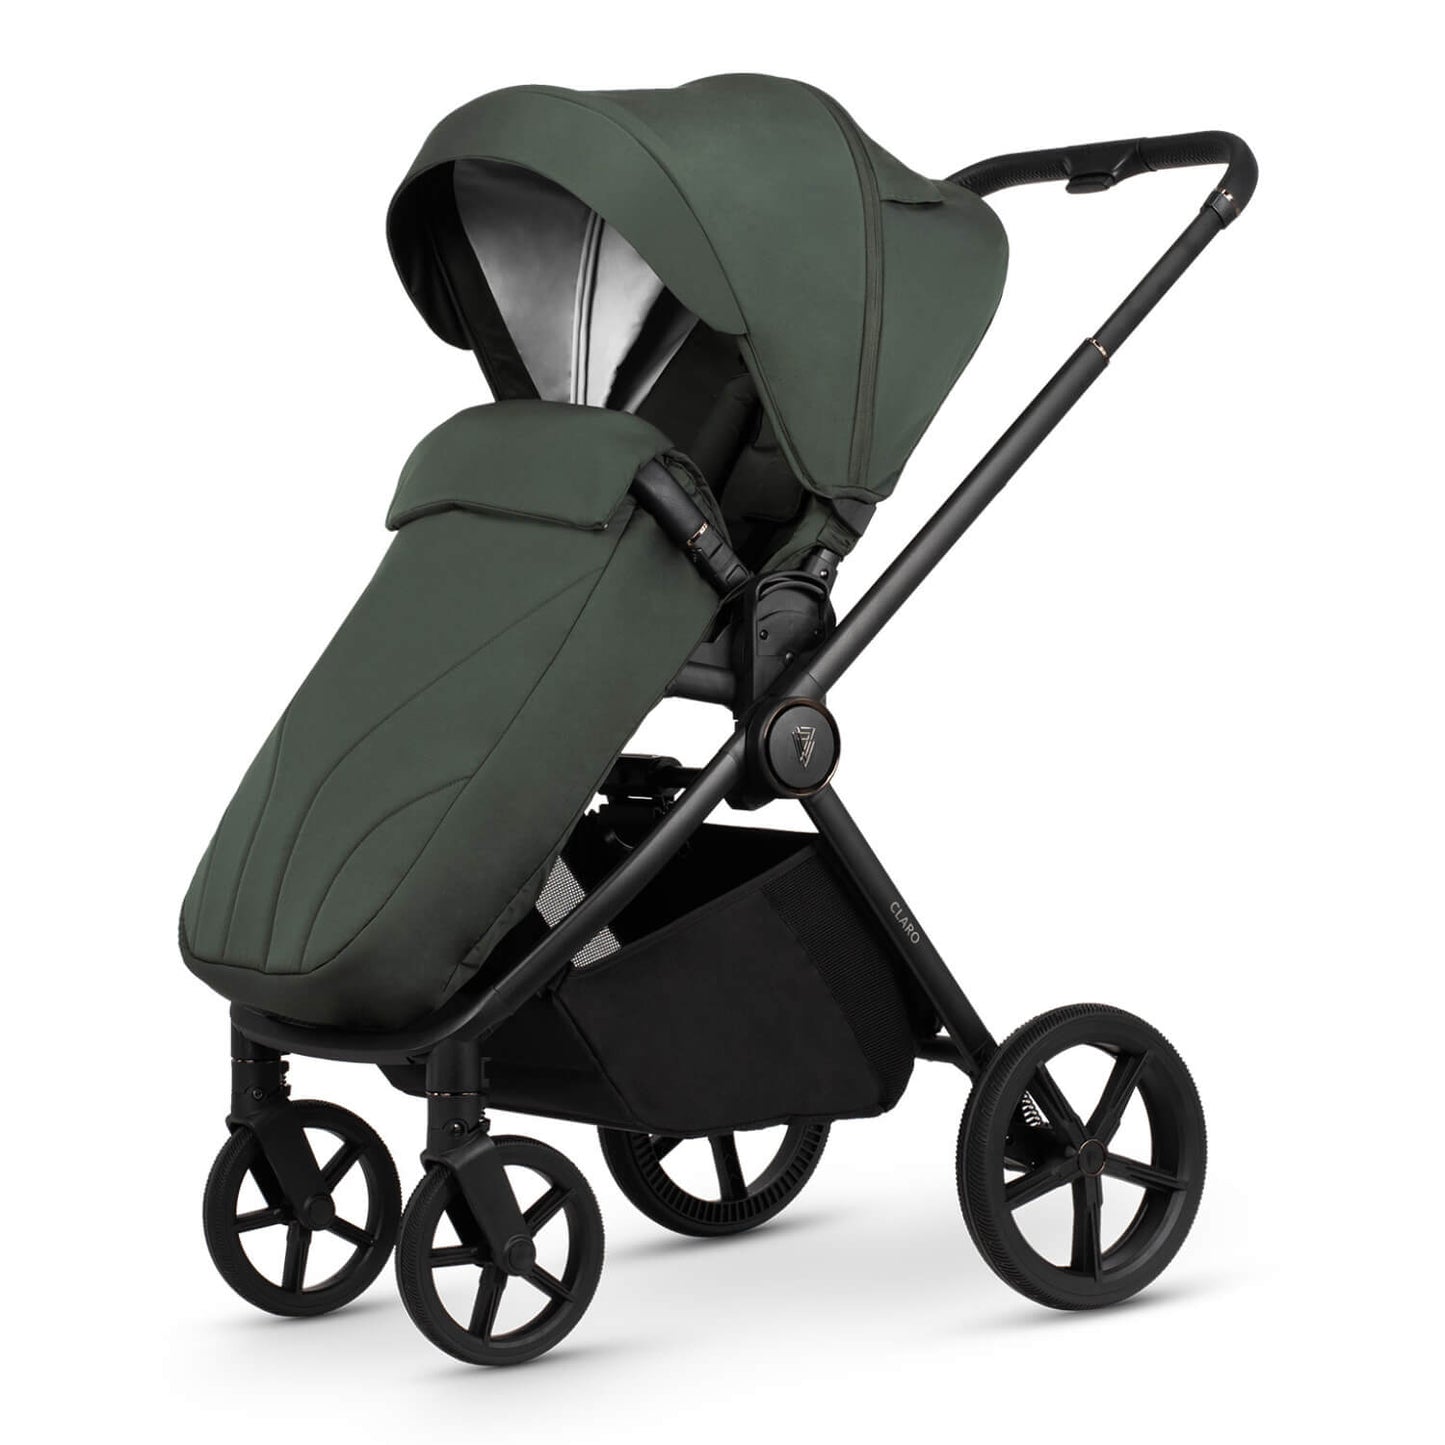 Venicci Claro 3-in-1 Travel System seat unit with footmuff in Forest green colour